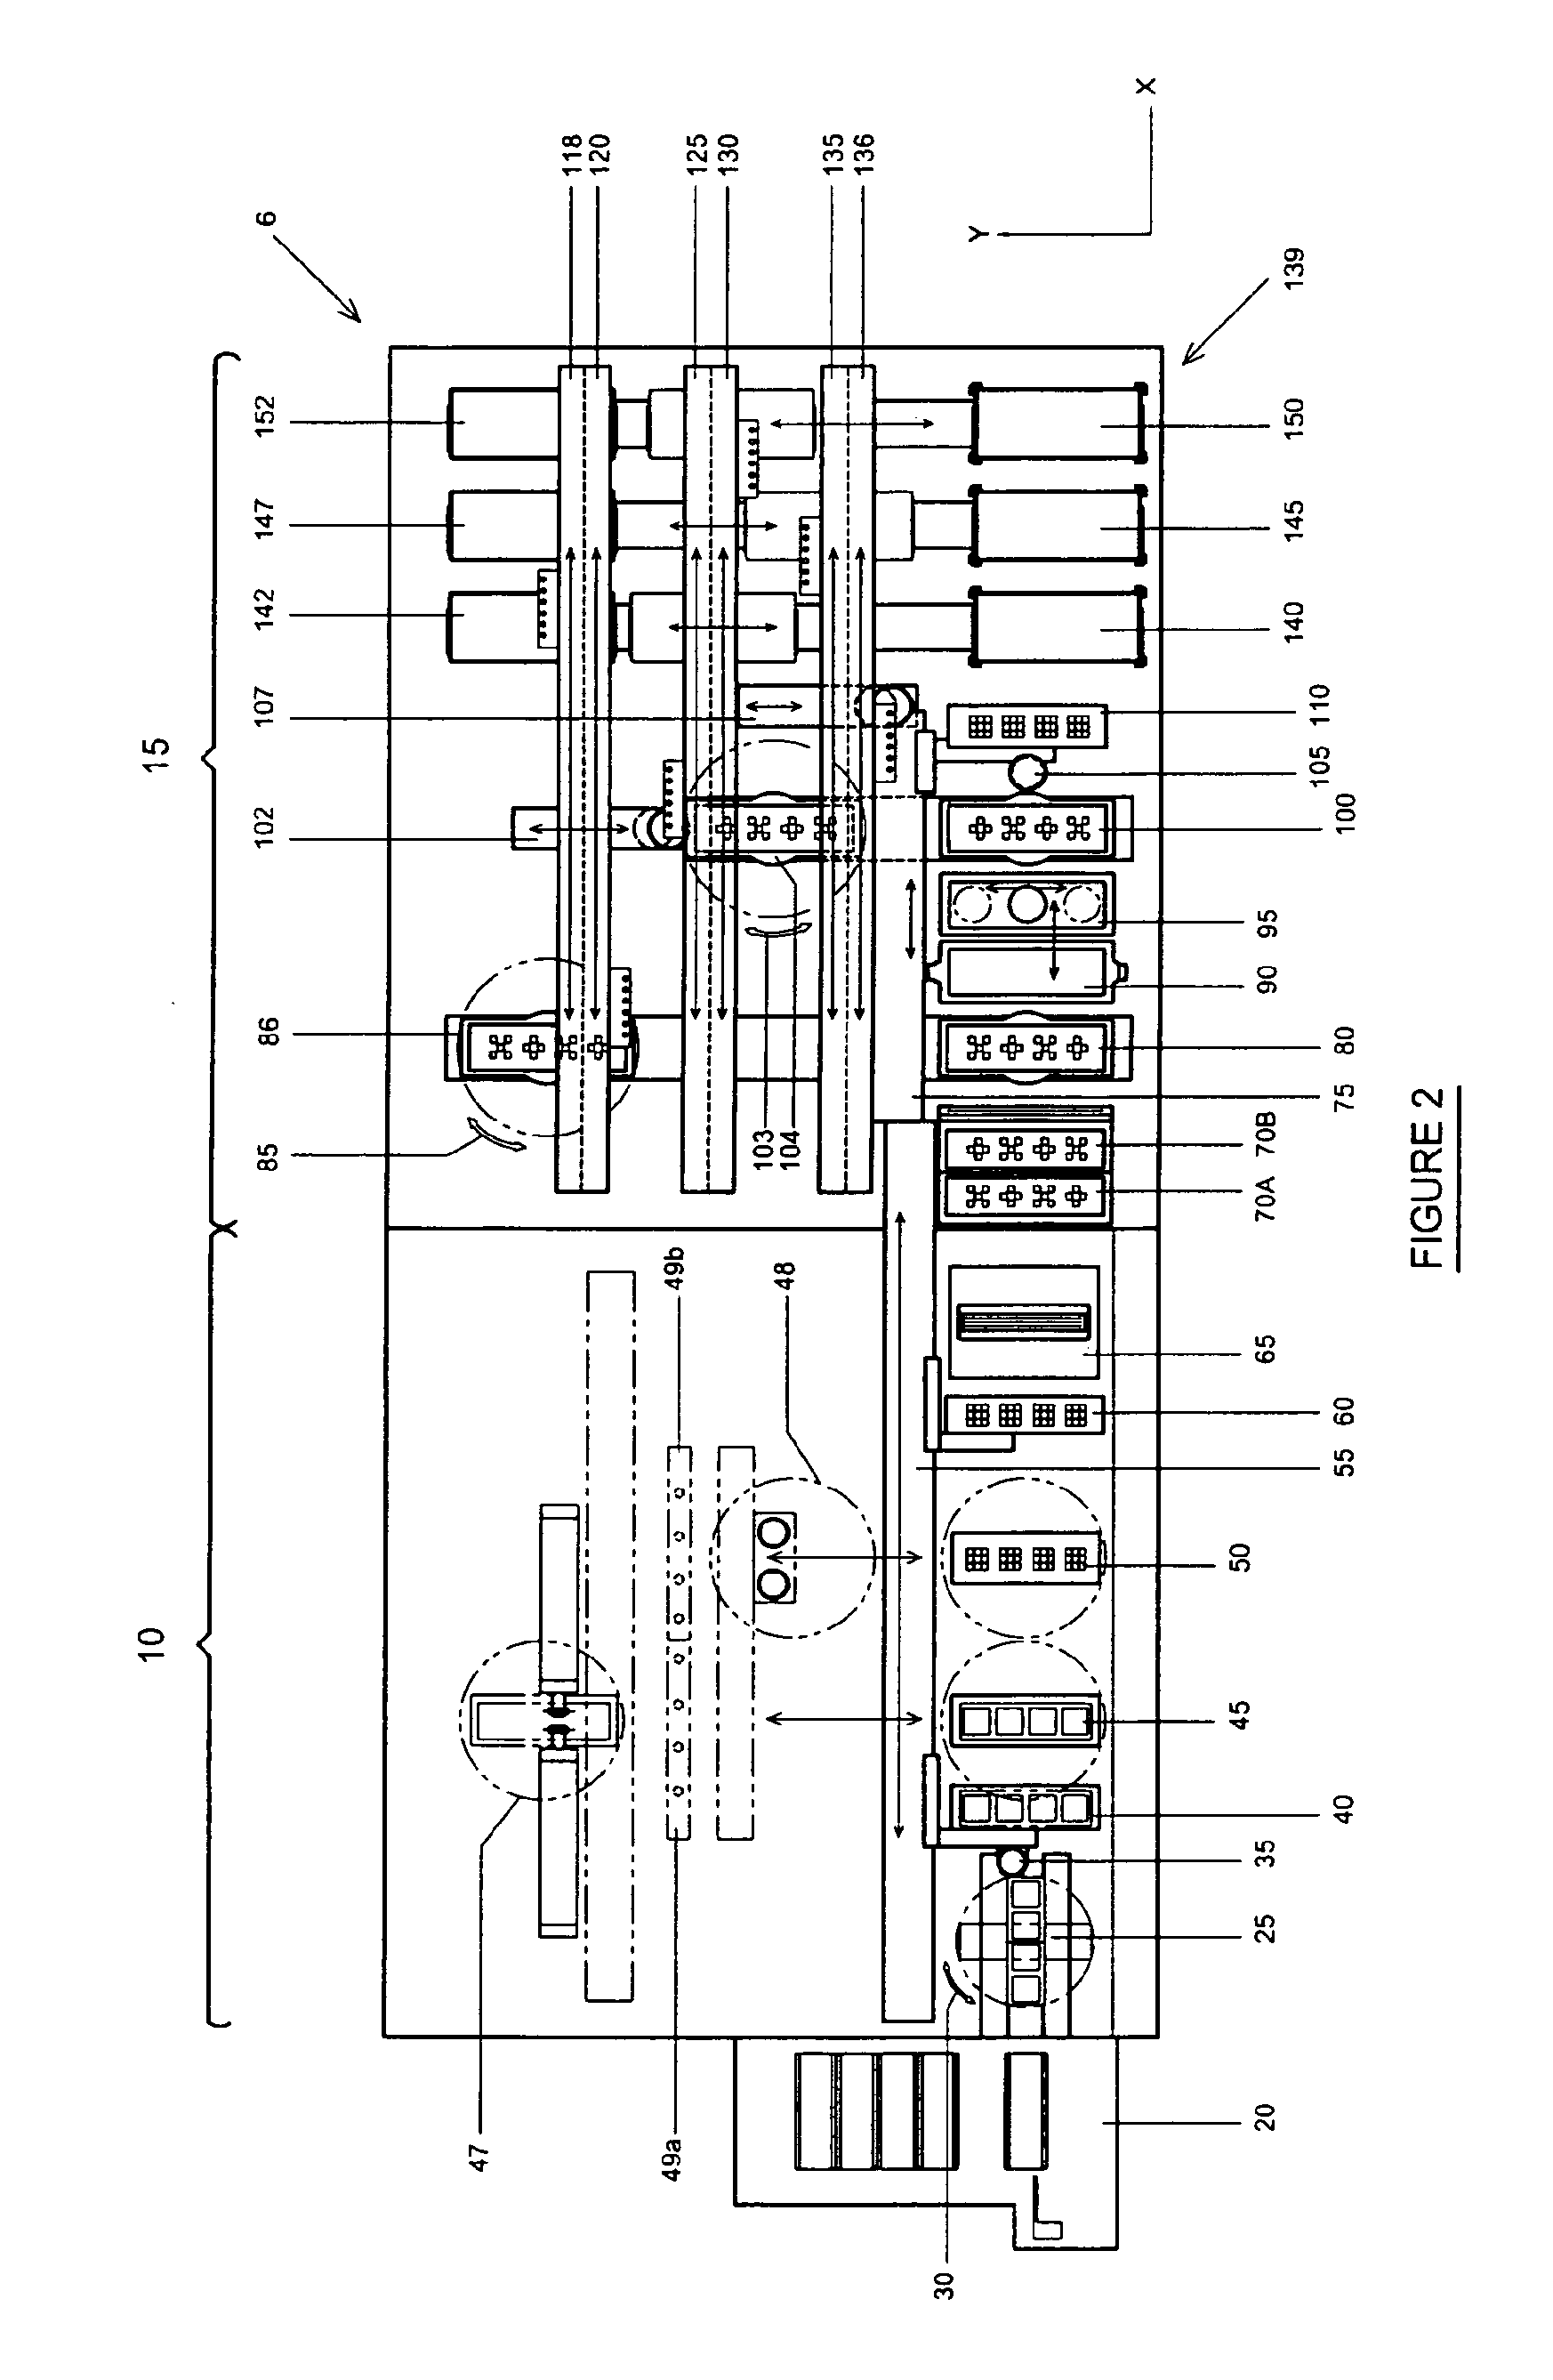 System and process for dicing integrated circuits